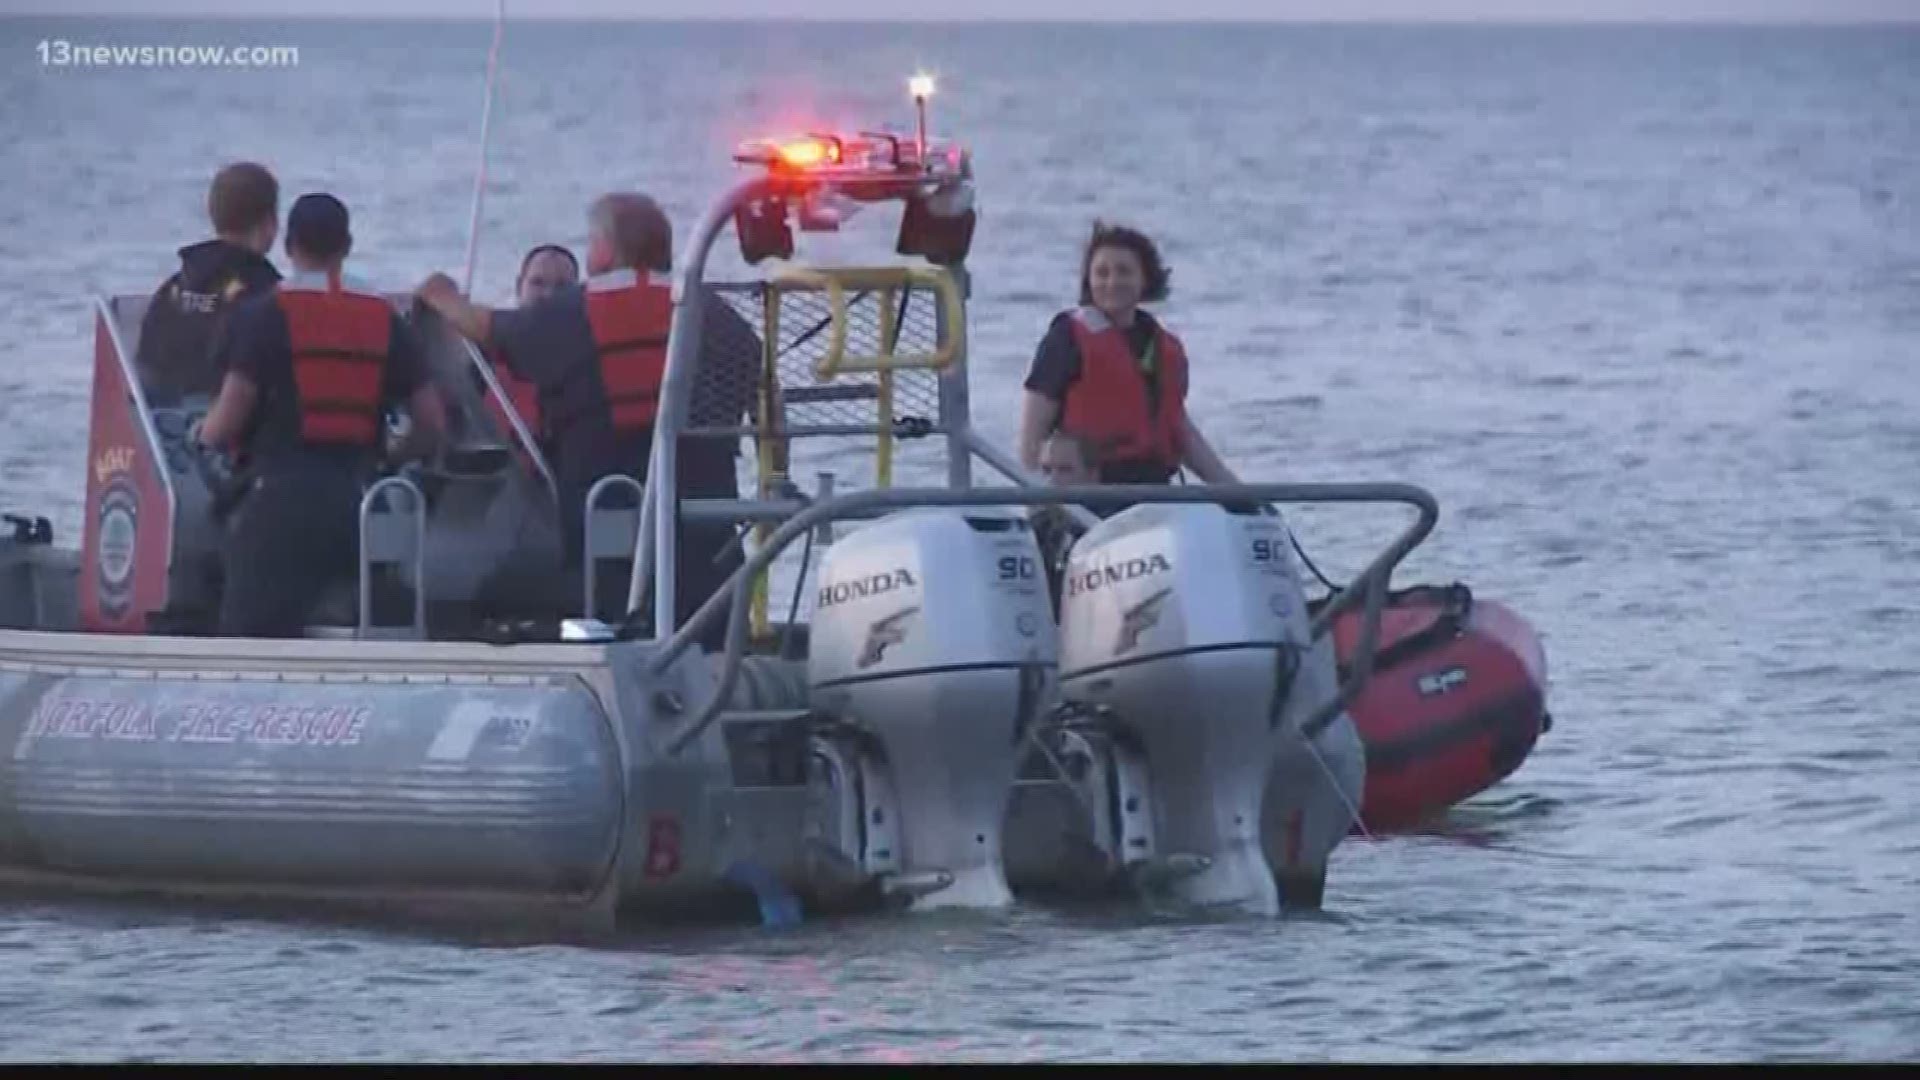 Several groups were searching the  waters off Ocean View for a missing 12-year-old boy Saturday night in Norfolk.